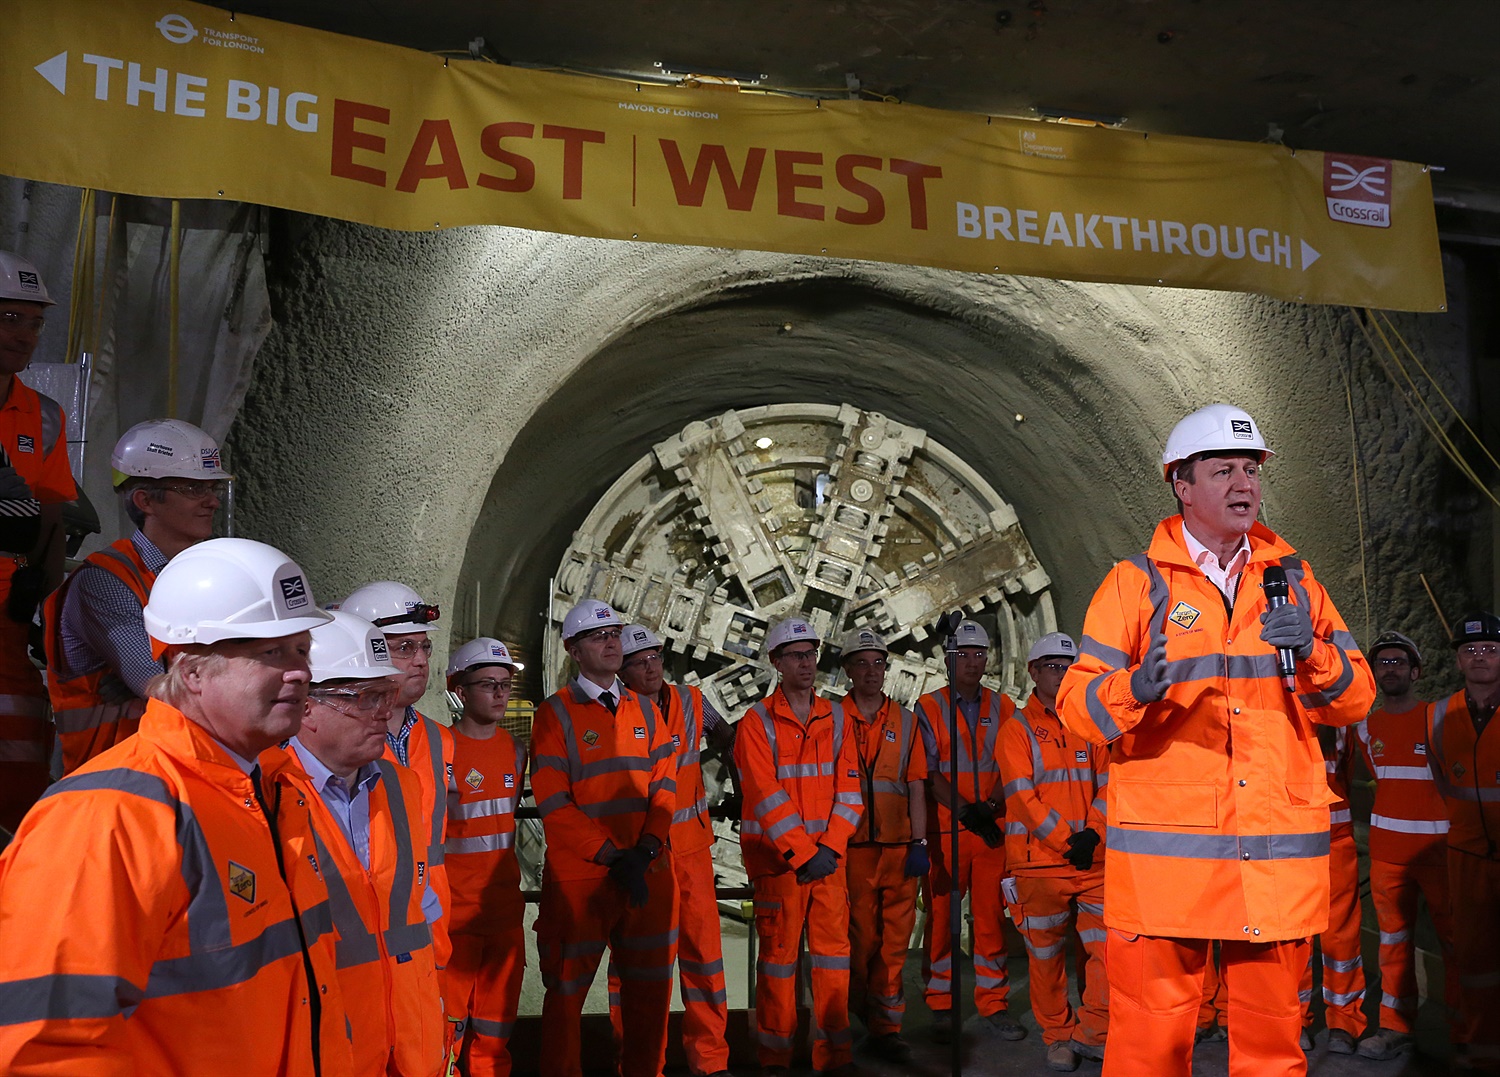 Crossrail completes tunnelling work 